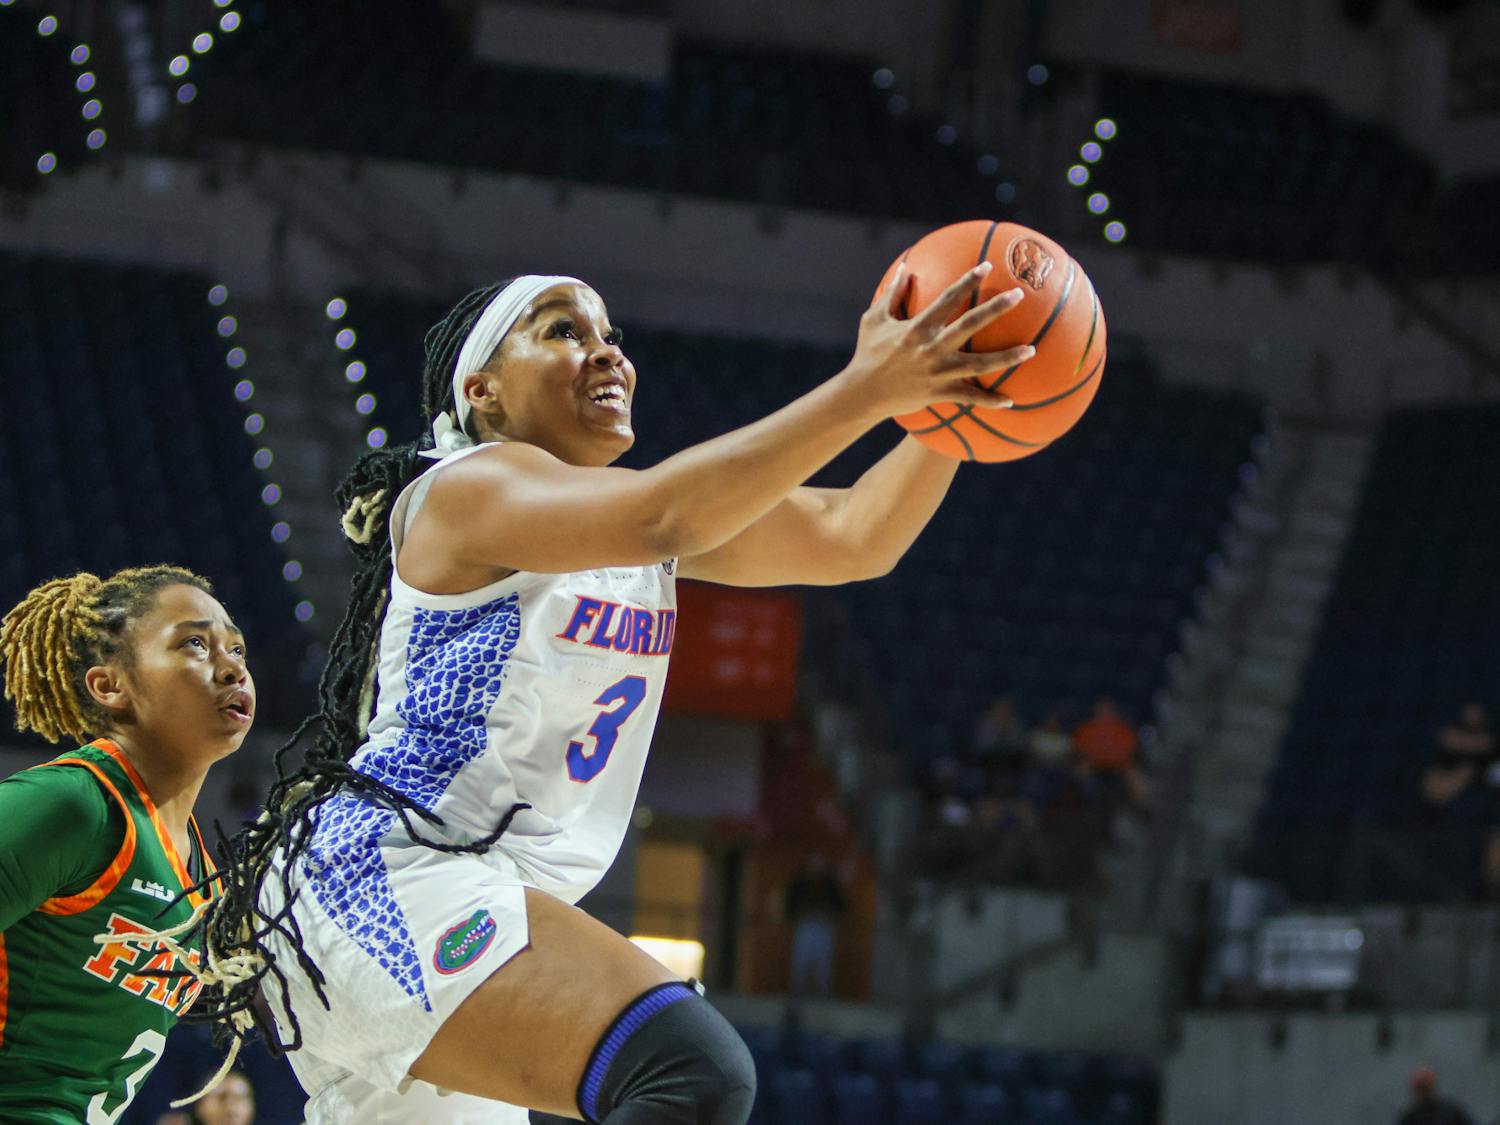 Florida guard KK Deans attacks the basket during the Gators game with Florida A&M Monday, Nov. 7, 2022. Deans lead UF in scoring with 23 points during its loss to the Florida State Seminoles Wednesday.